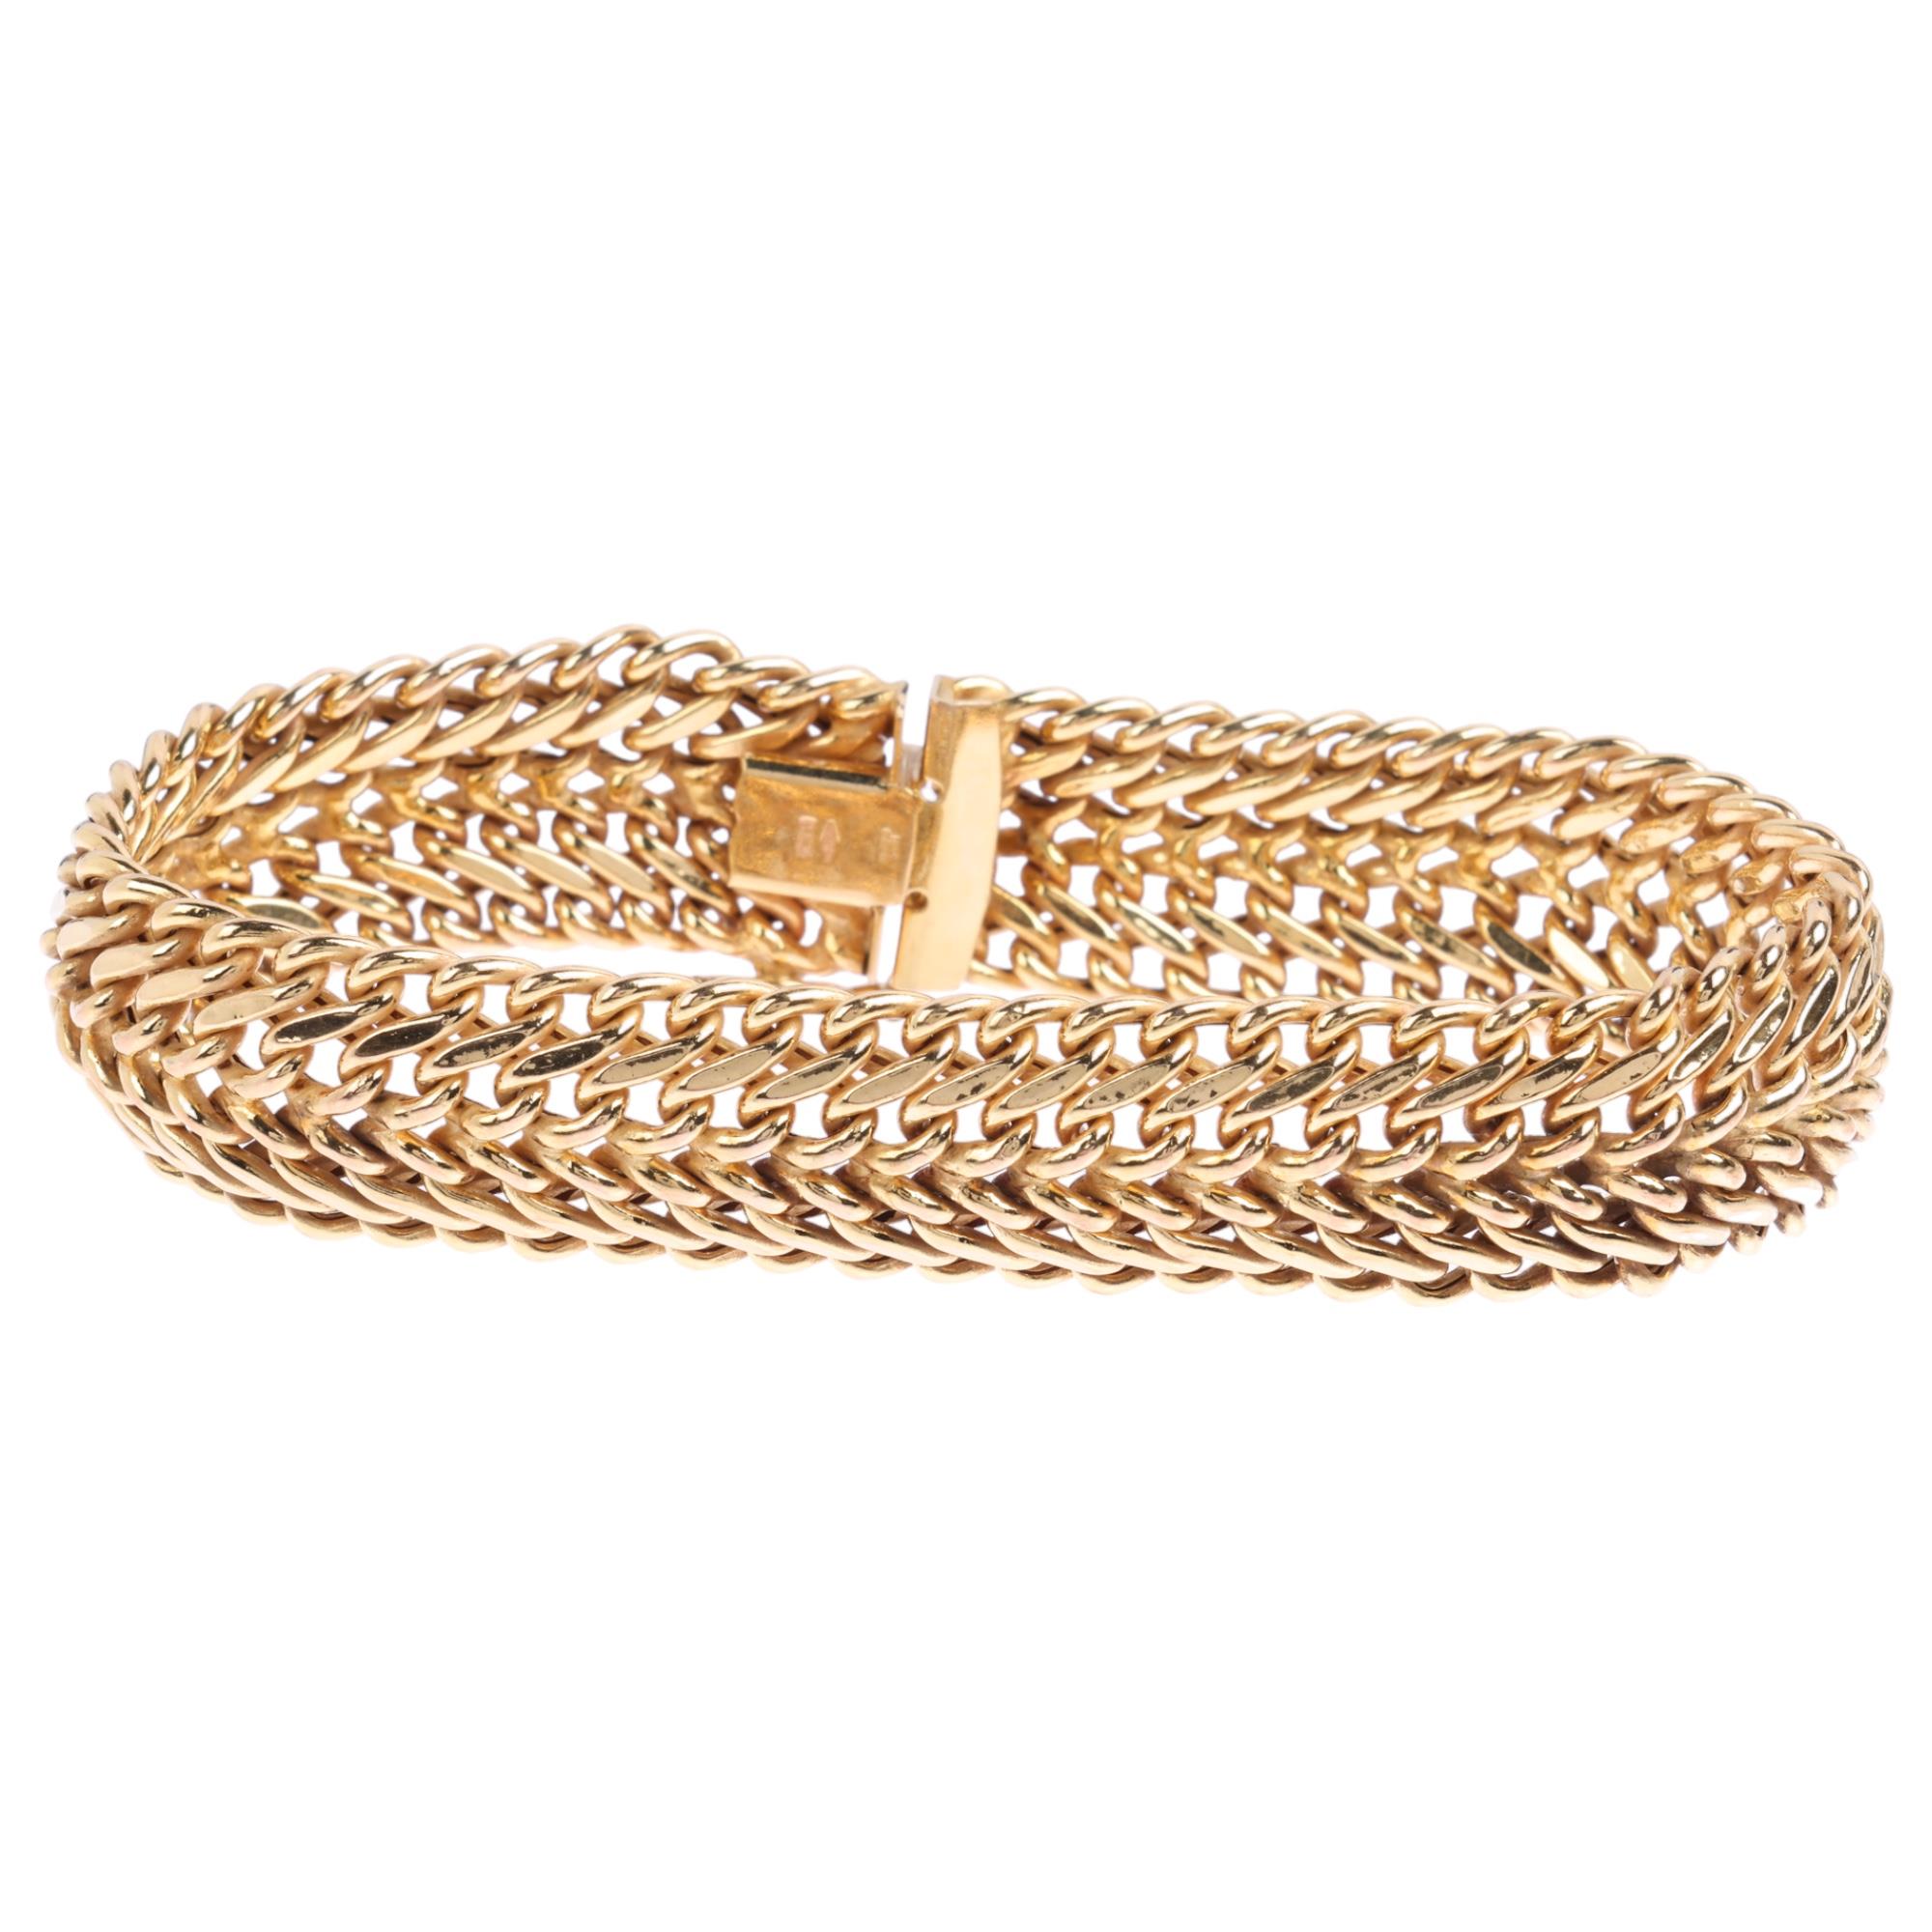 An Italian 9ct gold multiple hollow curb link chain bracelet, band width 14.9mm, 19cm, 16.9g